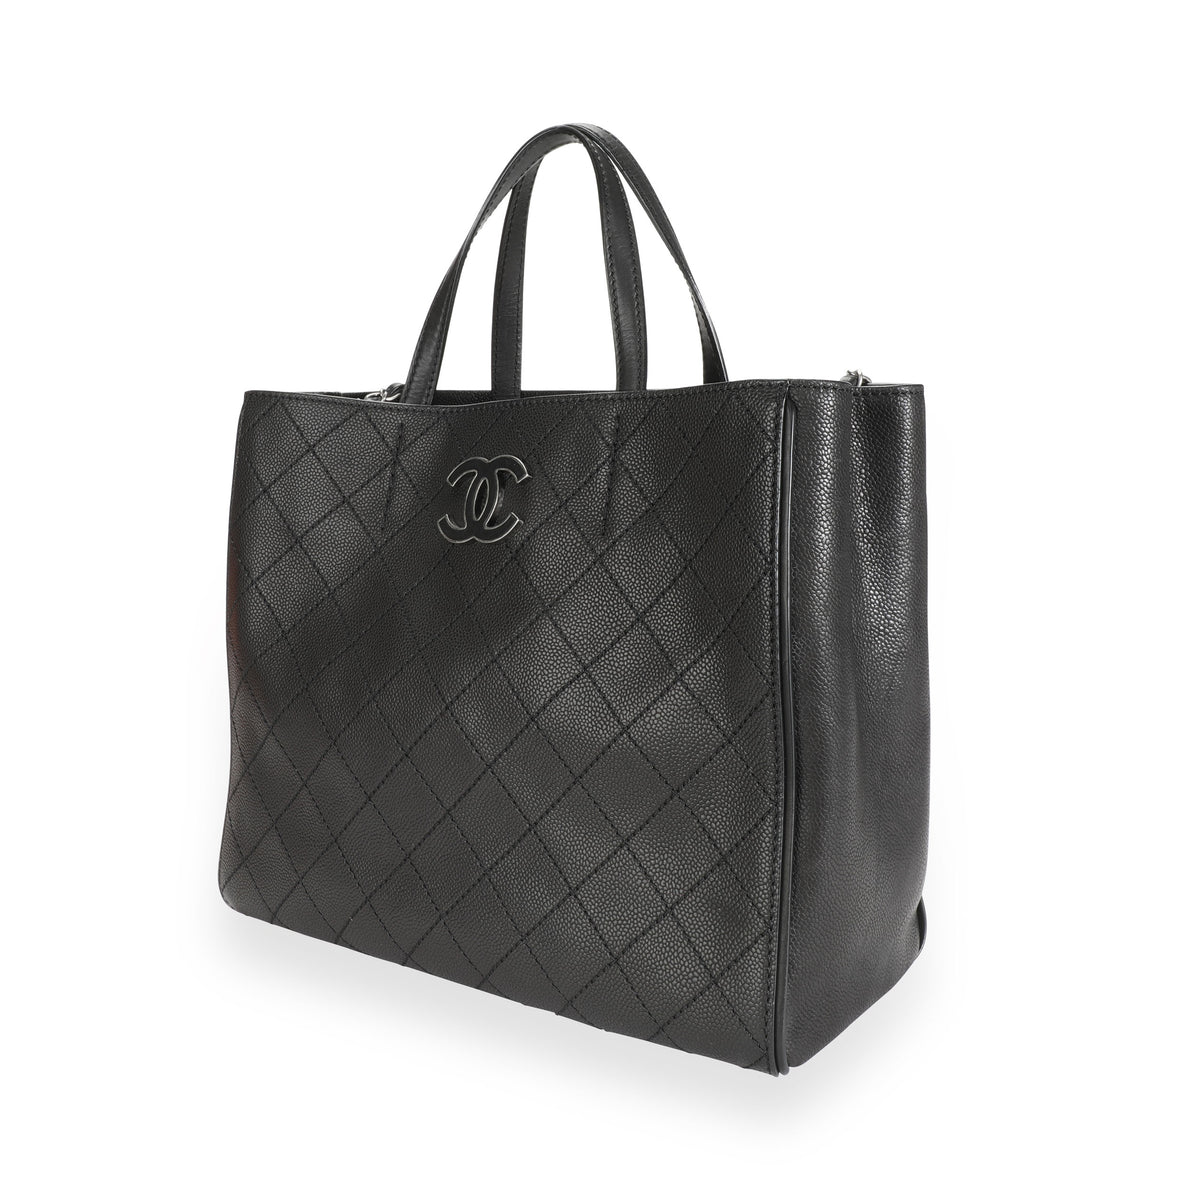 Chanel Black Stitched Grained Calfskin Hamptons Tote